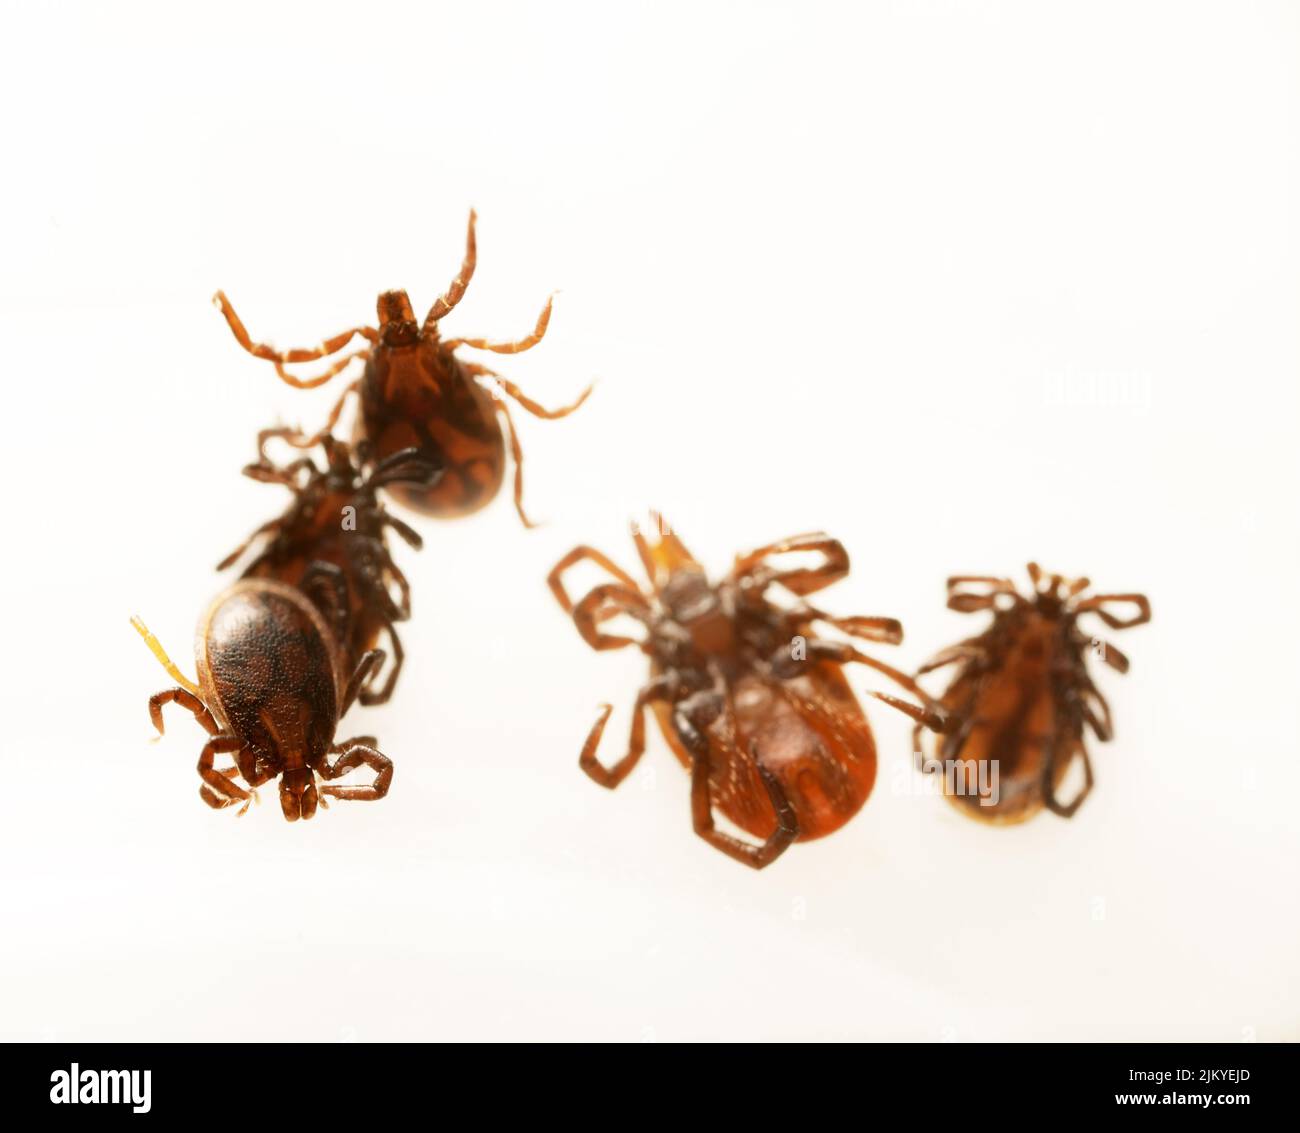 This ticks was removed from a dog in a broad-leaved Europian forest. Distributors of infection. Super close-up, top and bottom view Stock Photo